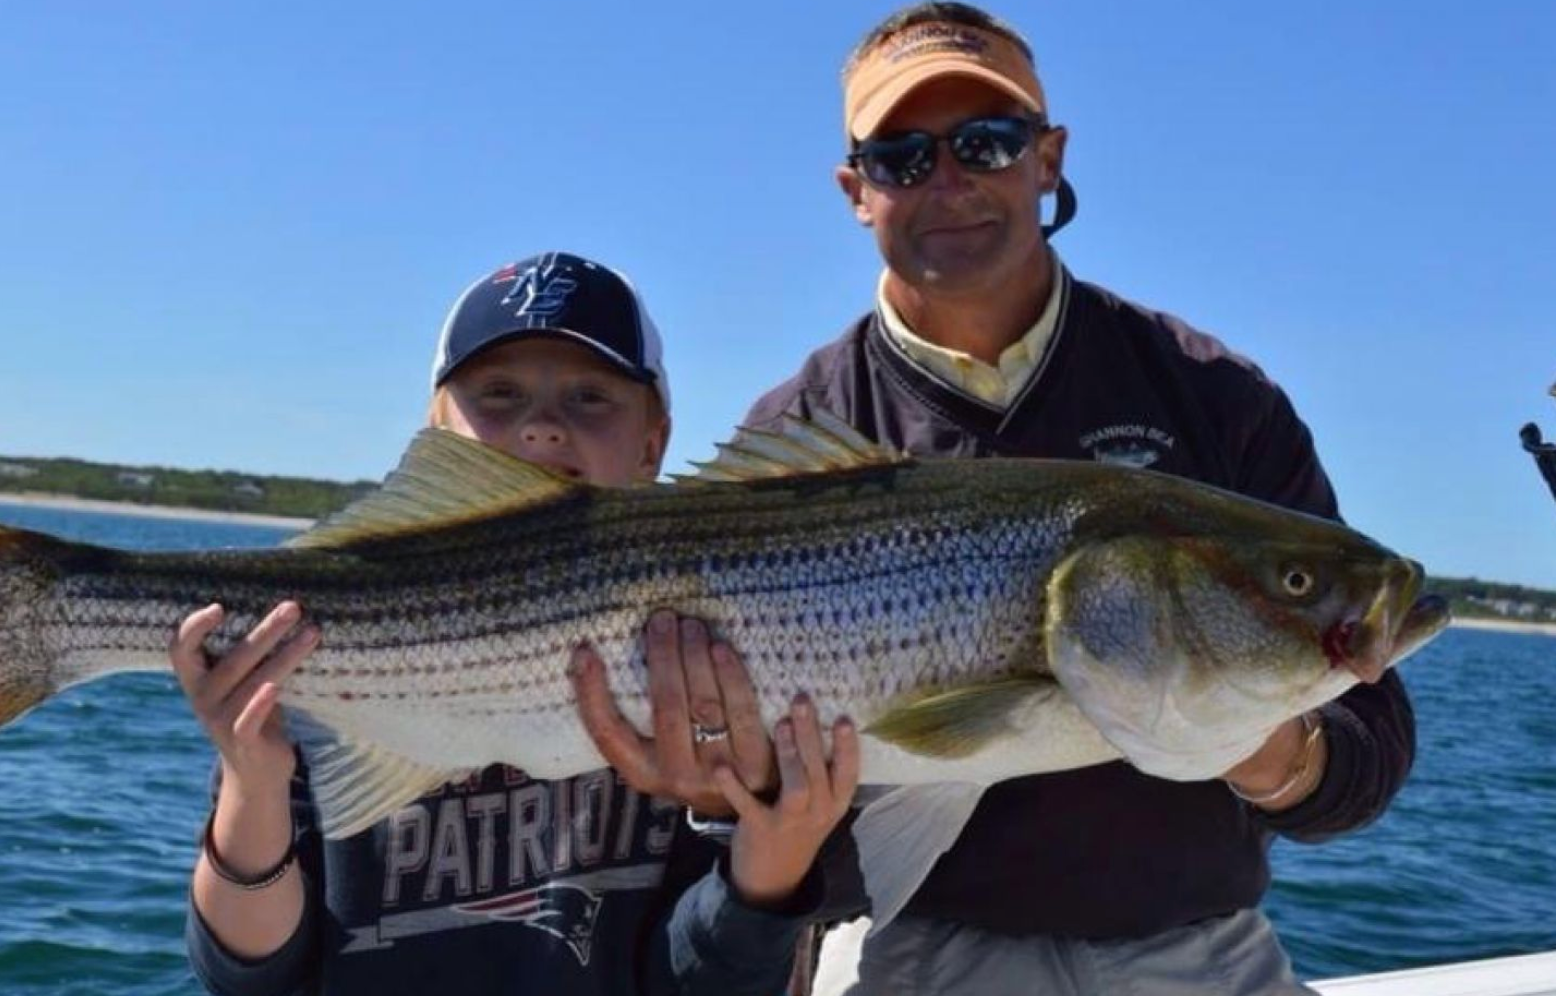 Striped Bass fishing charters in Massachusetts. Charter fishing for Striped  Bass along the shores of Cape Cod.